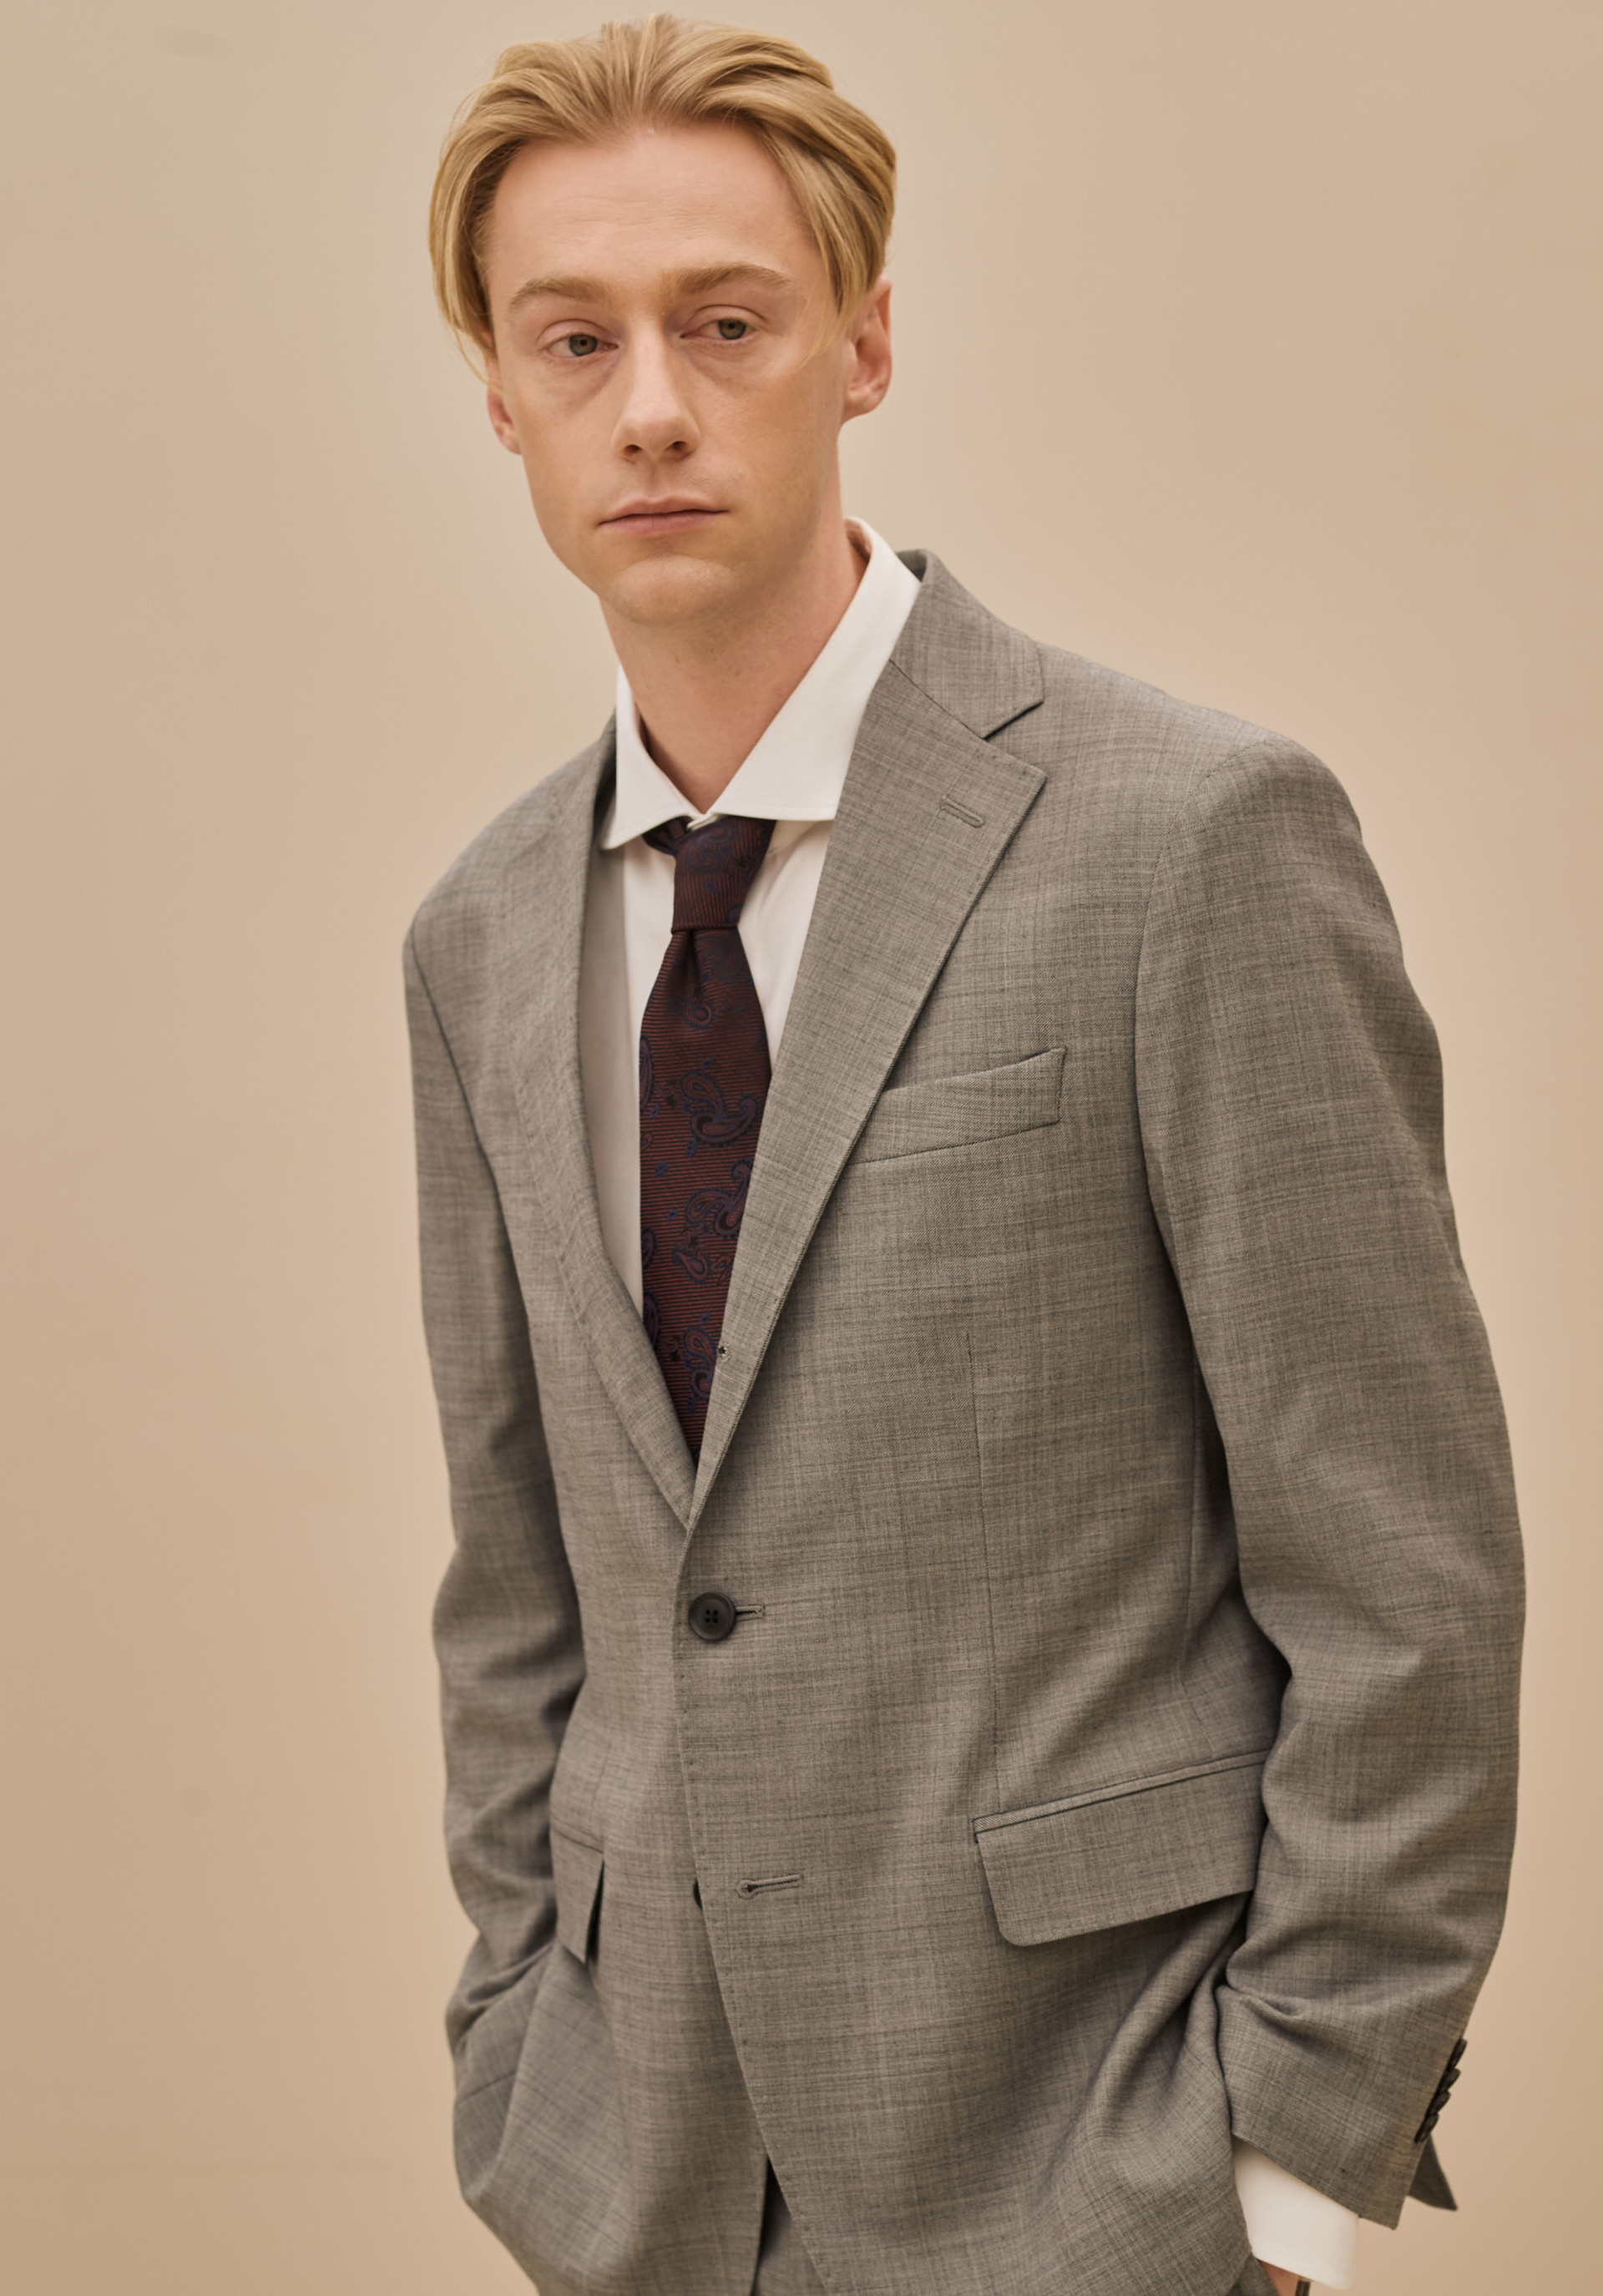 <p><span style="font-size: 10px;">TRADCLUB VINTAGE</span></p>  <p><strong><span style="font-size: 13px;">NOTTING HILL SUIT</span></strong></p> 